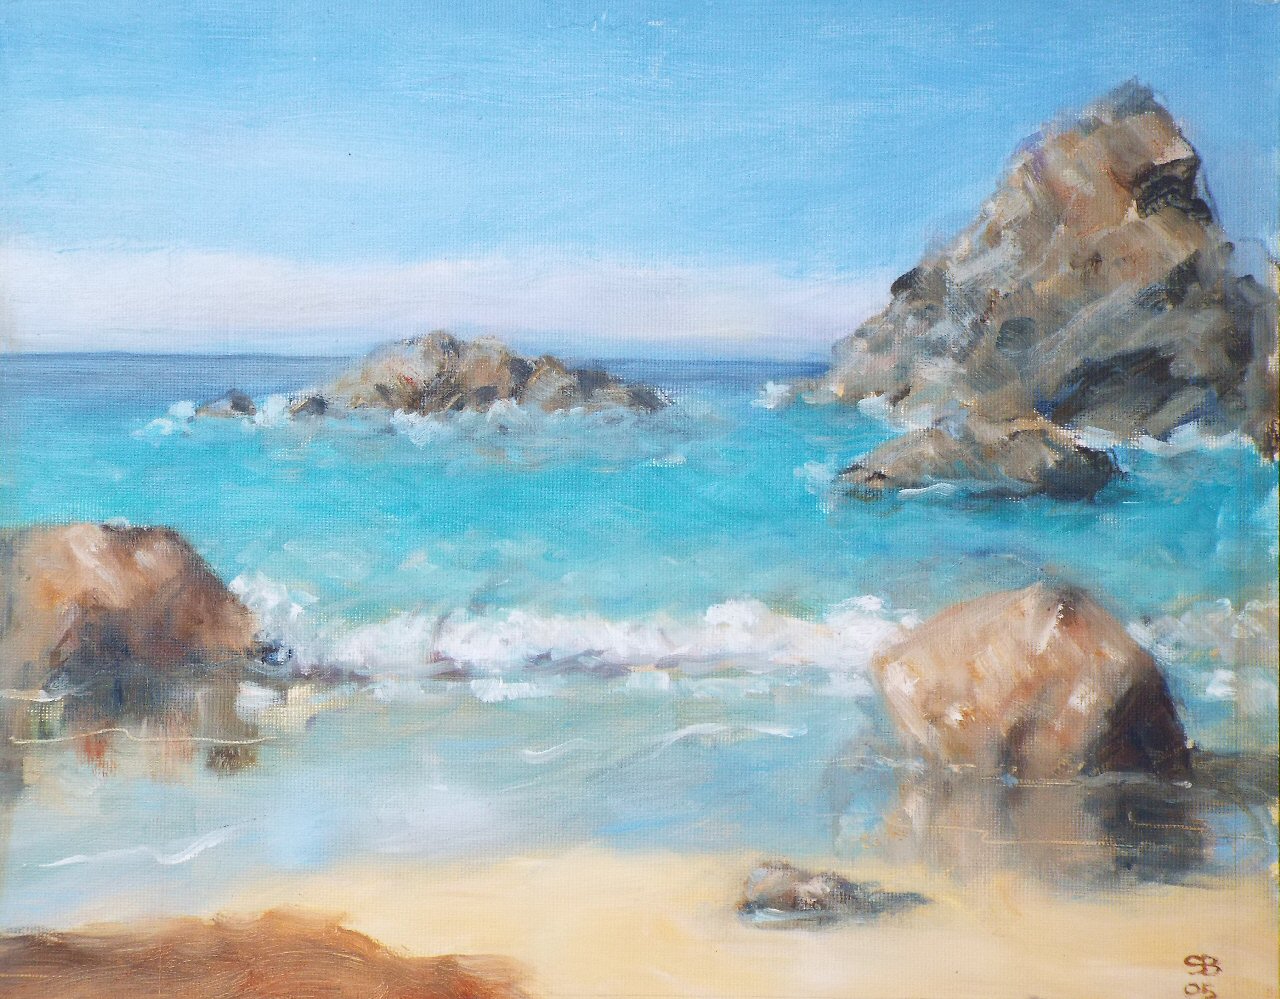 Oil on paper - Summer Morning, at Kynance Cove